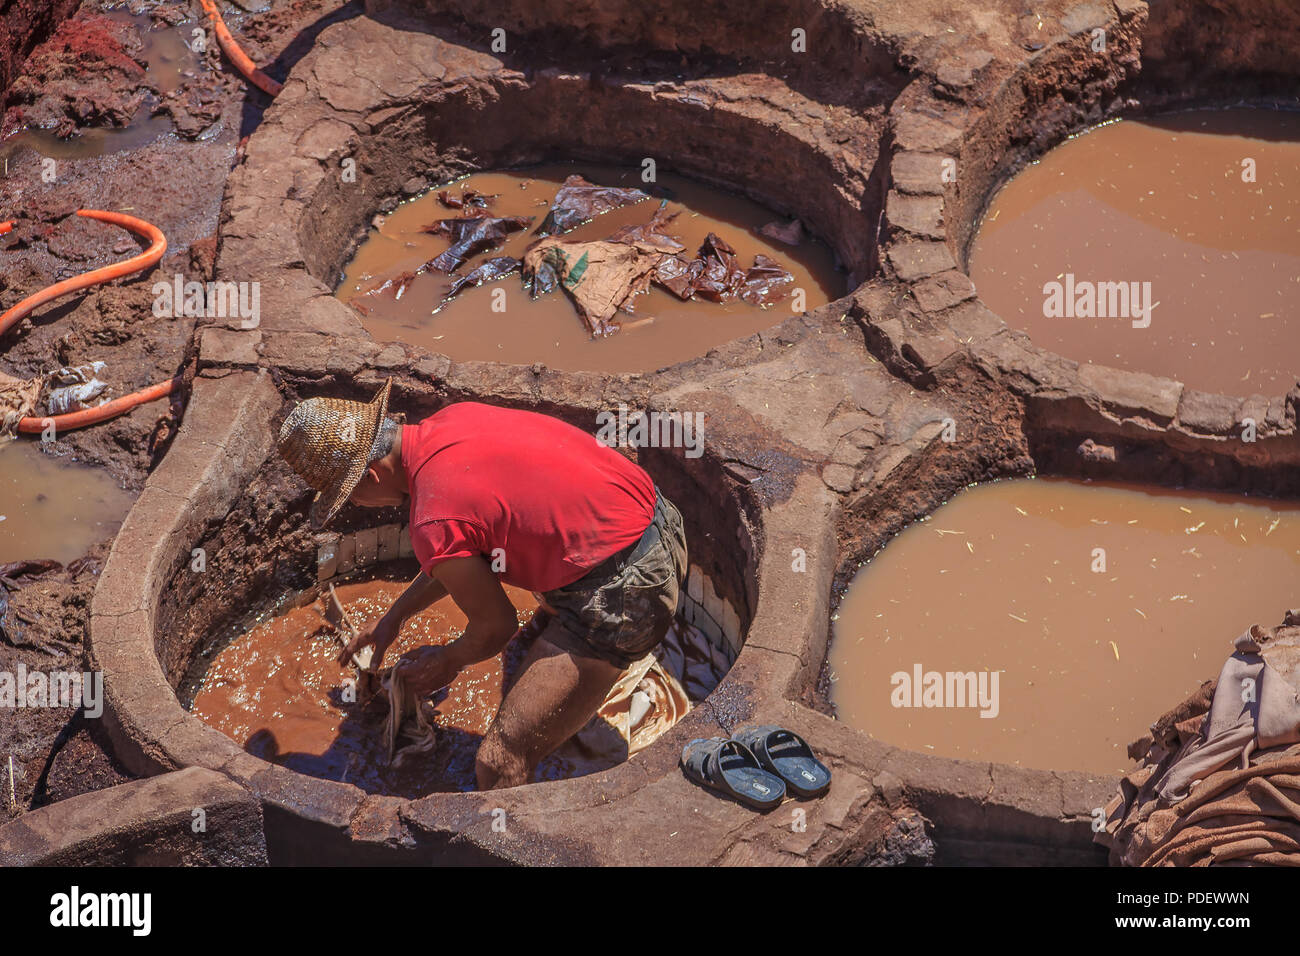 Fes, Morocco - May 11, 2013: Workers handling hides at a tannery in Fes, Morocco Stock Photo